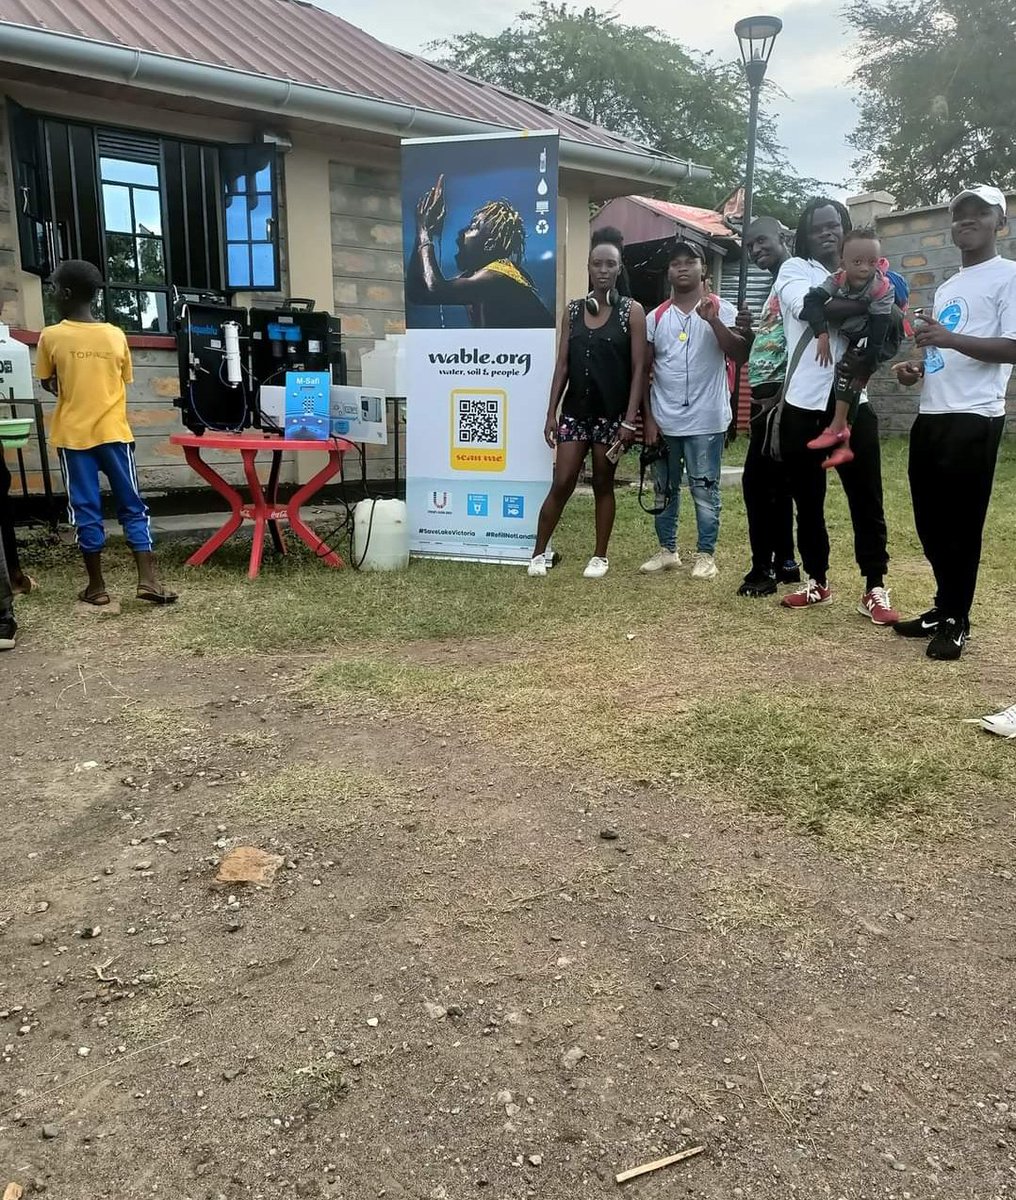 Wable clean water outreach programme in the Rusinga festival ,mbita. We provide knowledge on the importance of drinking clean water and bring the purification to them🤗. #cleandrinkingwater
#wablemajisafi
#mbita